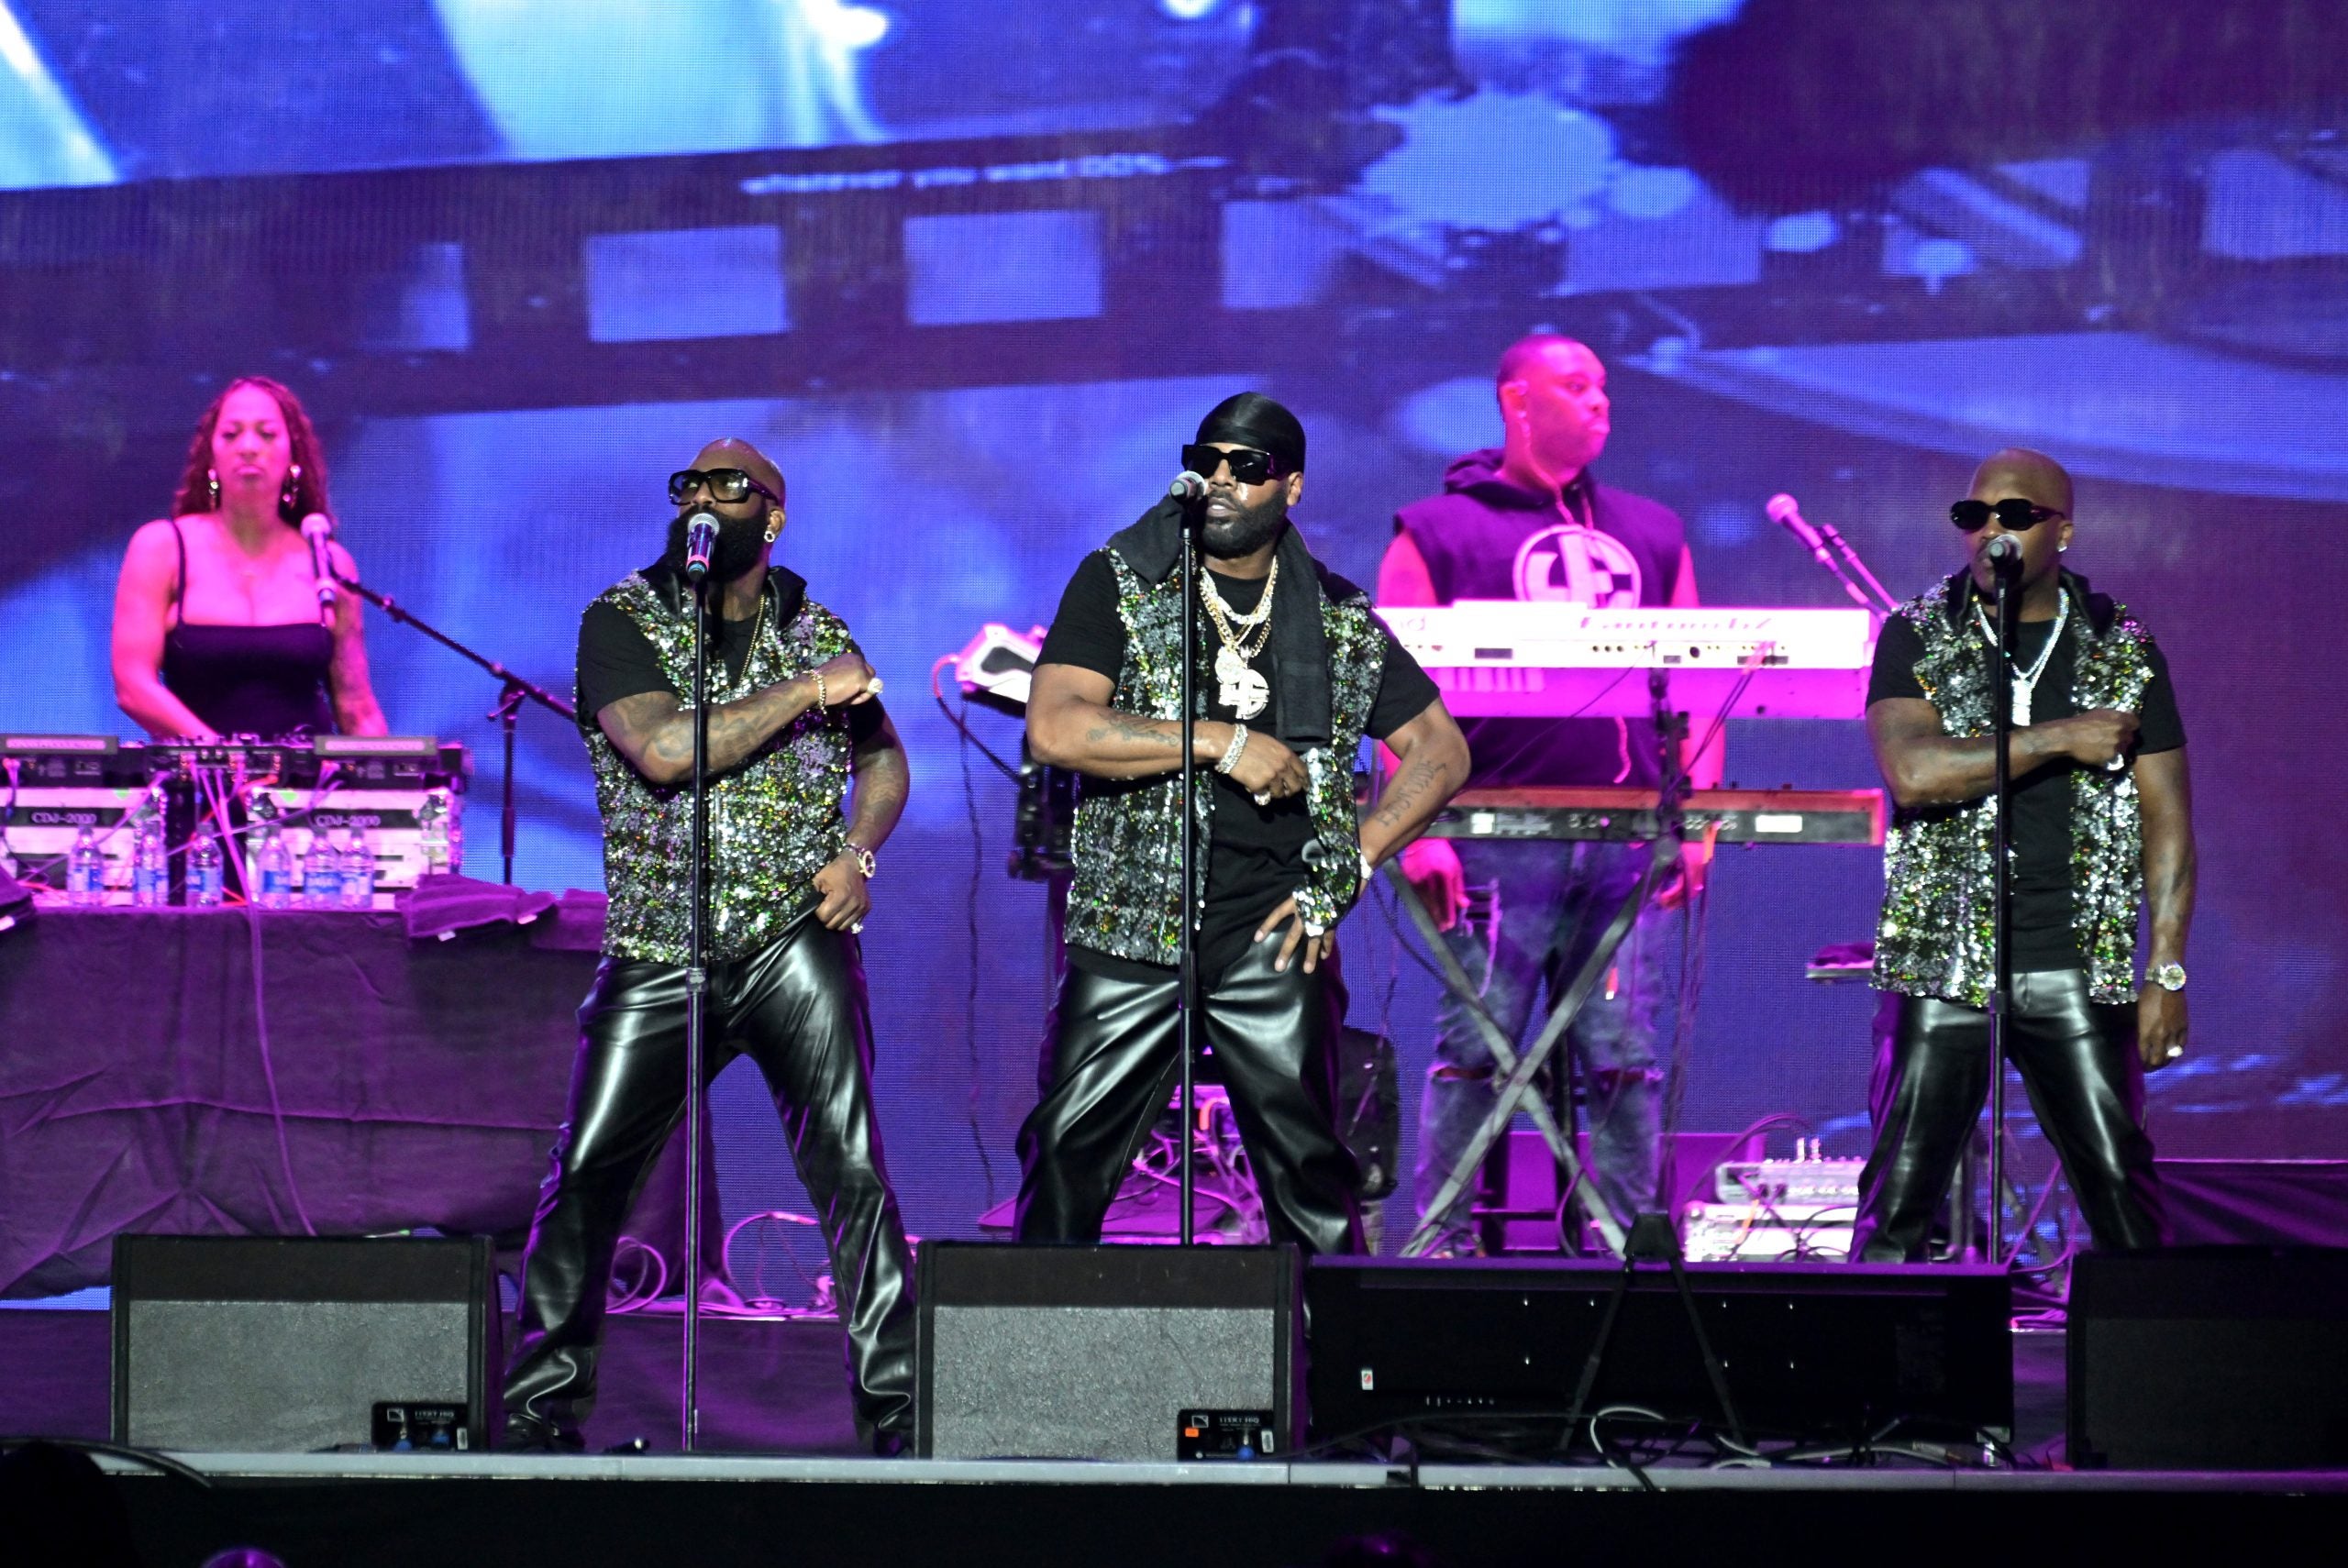 The Opening Night Of The 2023 Essence Festival Was Filled With Laughs, Love, And A Celebration Of Hip-Hop!